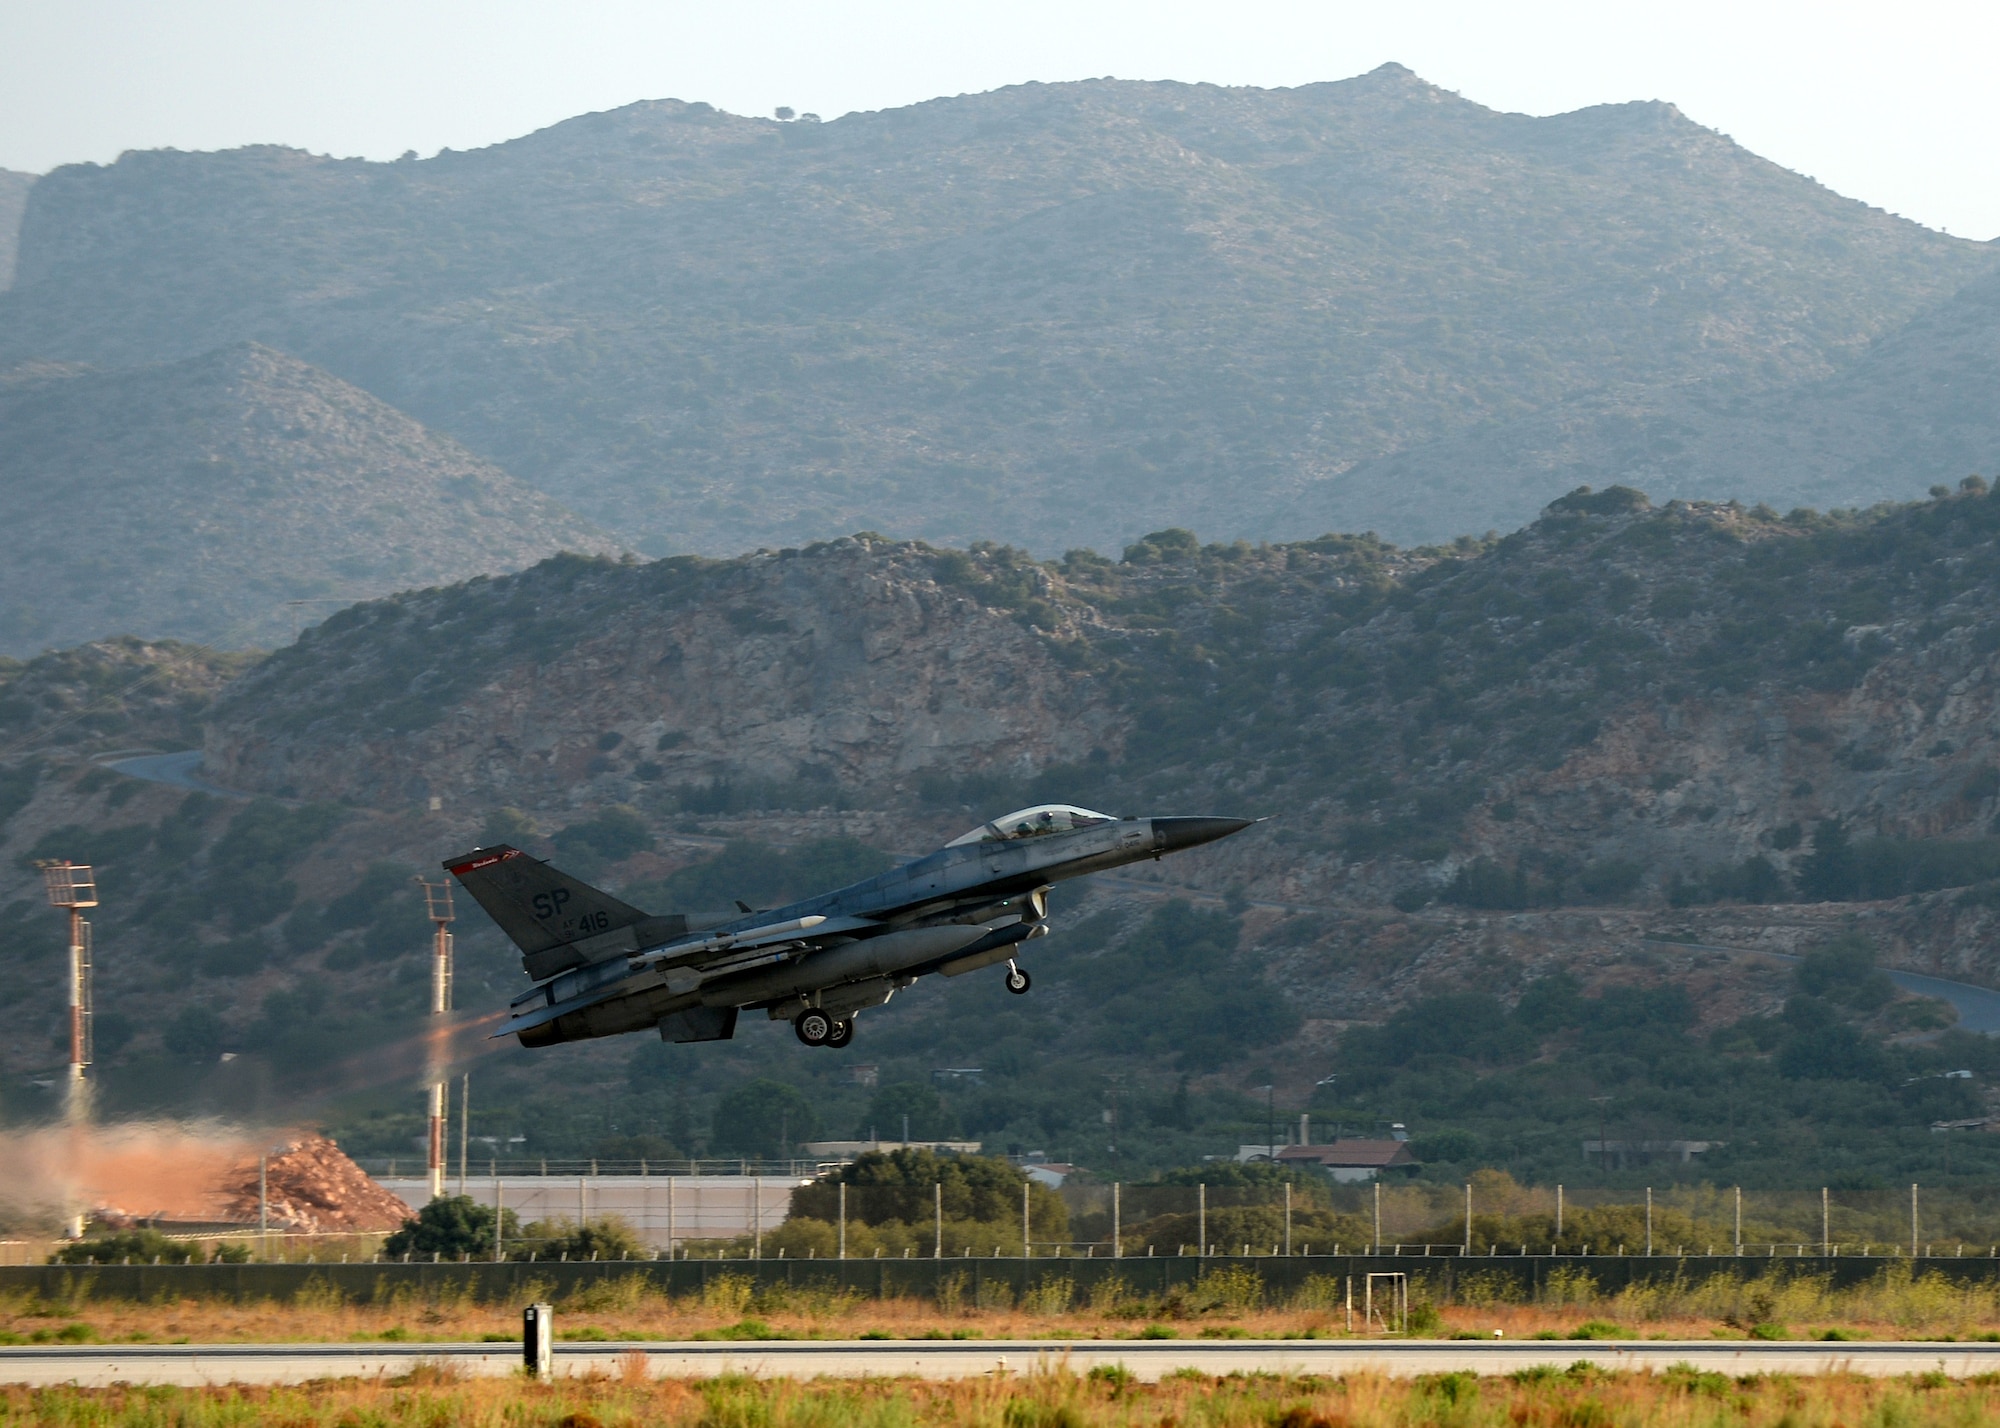 A U.S. Air Force F-16 Fighting Falcon fighter aircraft pilot launches his jet Aug. 18, 2014, at Souda Bay, Greece, during a training event between Greece and the U.S. The training included 22 aircraft launches a day. (U.S. Air Force photo by Staff Sgt. Daryl Knee/Released)